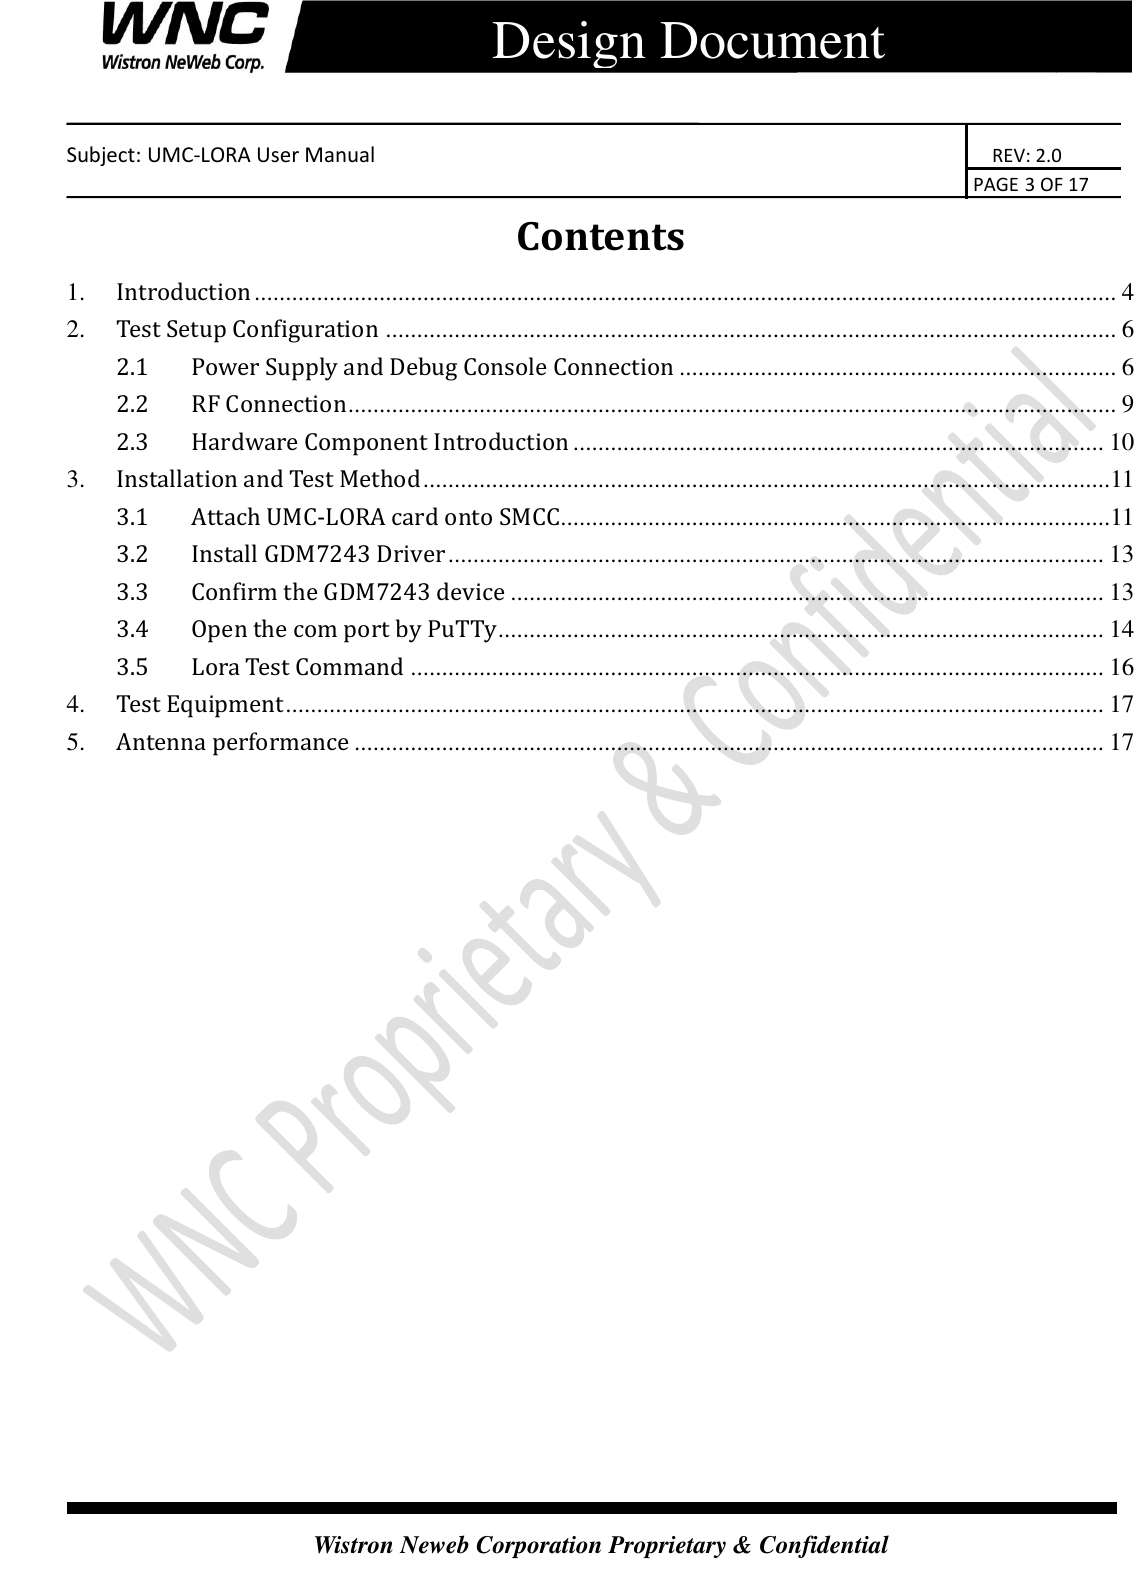    Subject: UMC-LORA User Manual                                                                      REV: 2.0                                                                                        PAGE 3 OF 17  Wistron Neweb Corporation Proprietary &amp; Confidential      Design Document Contents 1. Introduction .......................................................................................................................................... 4 2. Test Setup Configuration ..................................................................................................................... 6 2.1 Power Supply and Debug Console Connection ...................................................................... 6 2.2 RF Connection ........................................................................................................................... 9 2.3 Hardware Component Introduction ..................................................................................... 10 3. Installation and Test Method ..............................................................................................................11 3.1 Attach UMC-LORA card onto SMCC........................................................................................11 3.2 Install GDM7243 Driver ......................................................................................................... 13 3.3 Confirm the GDM7243 device ............................................................................................... 13 3.4 Open the com port by PuTTy ................................................................................................. 14 3.5 Lora Test Command ............................................................................................................... 16 4. Test Equipment ................................................................................................................................... 17 5. Antenna performance ........................................................................................................................ 17          